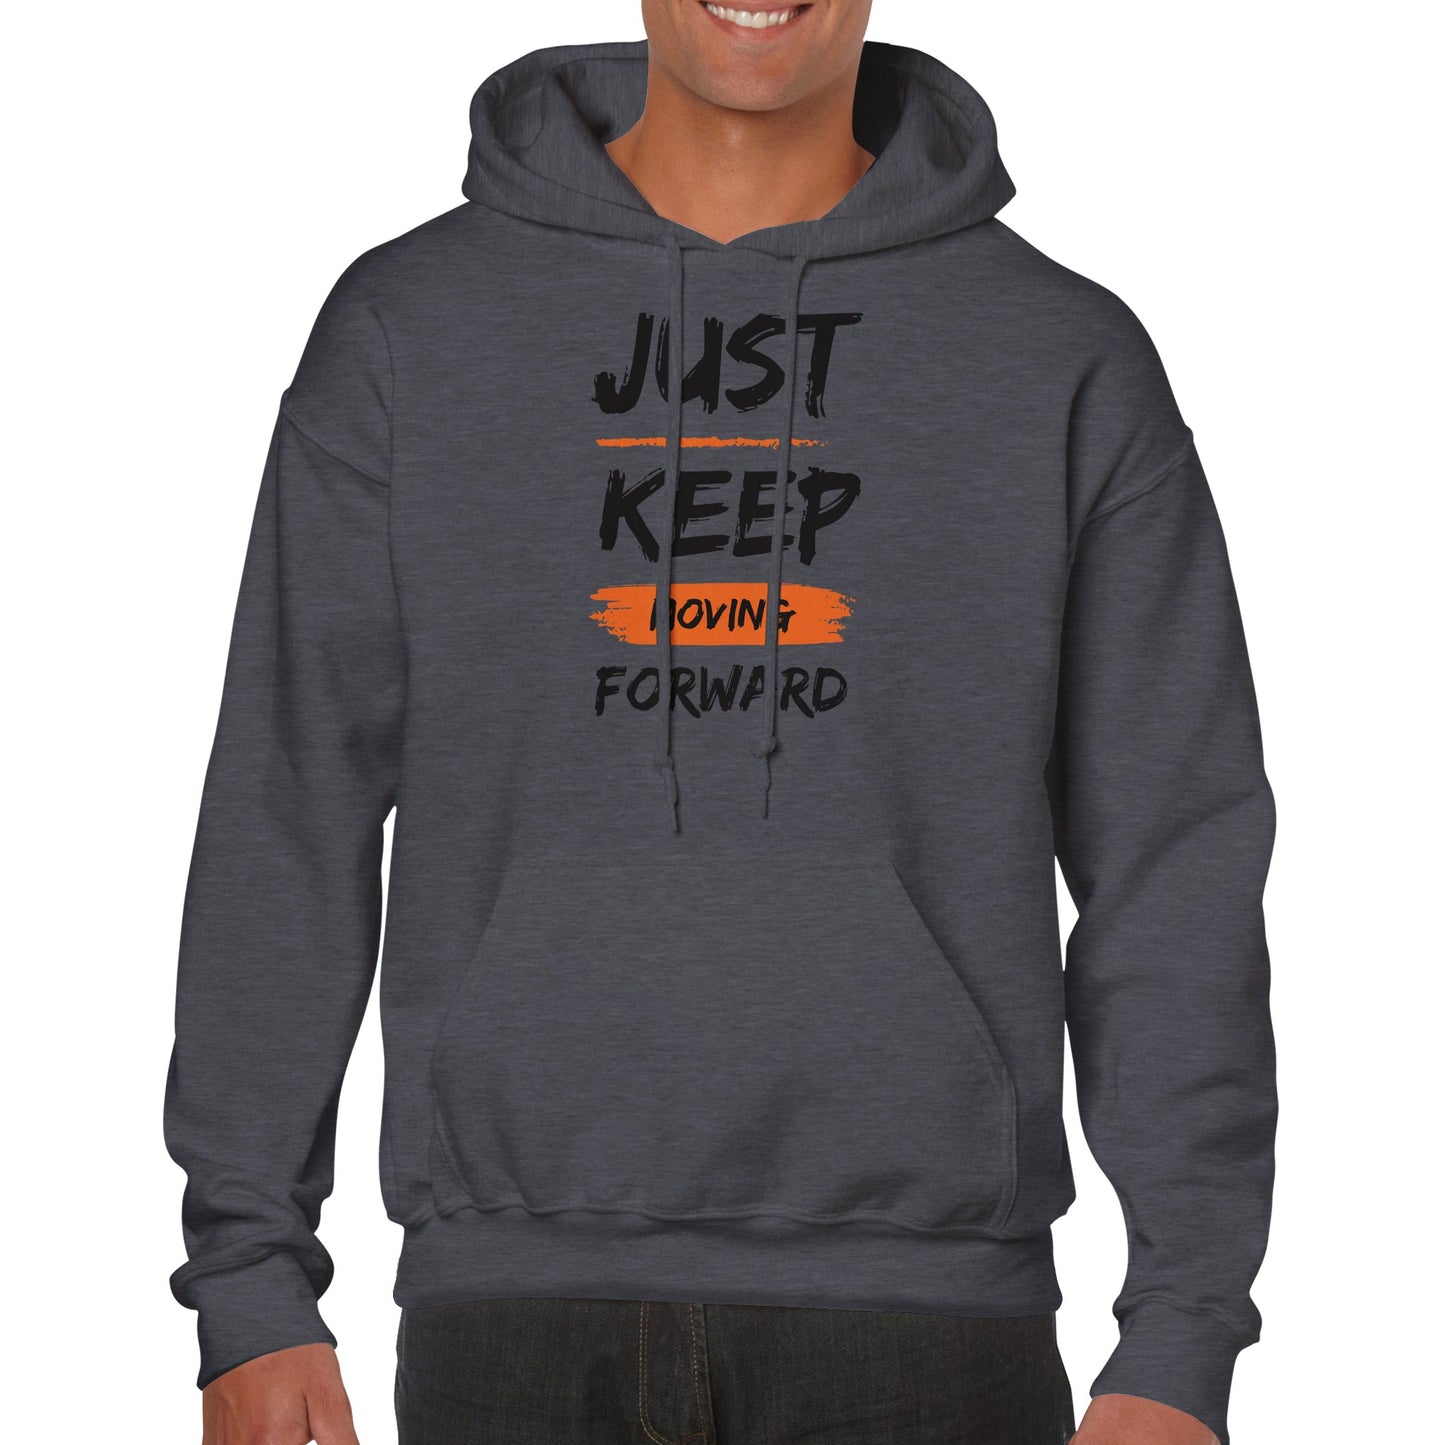 Just Keep Moving Forward - Classic Unisex Pullover Hoodie